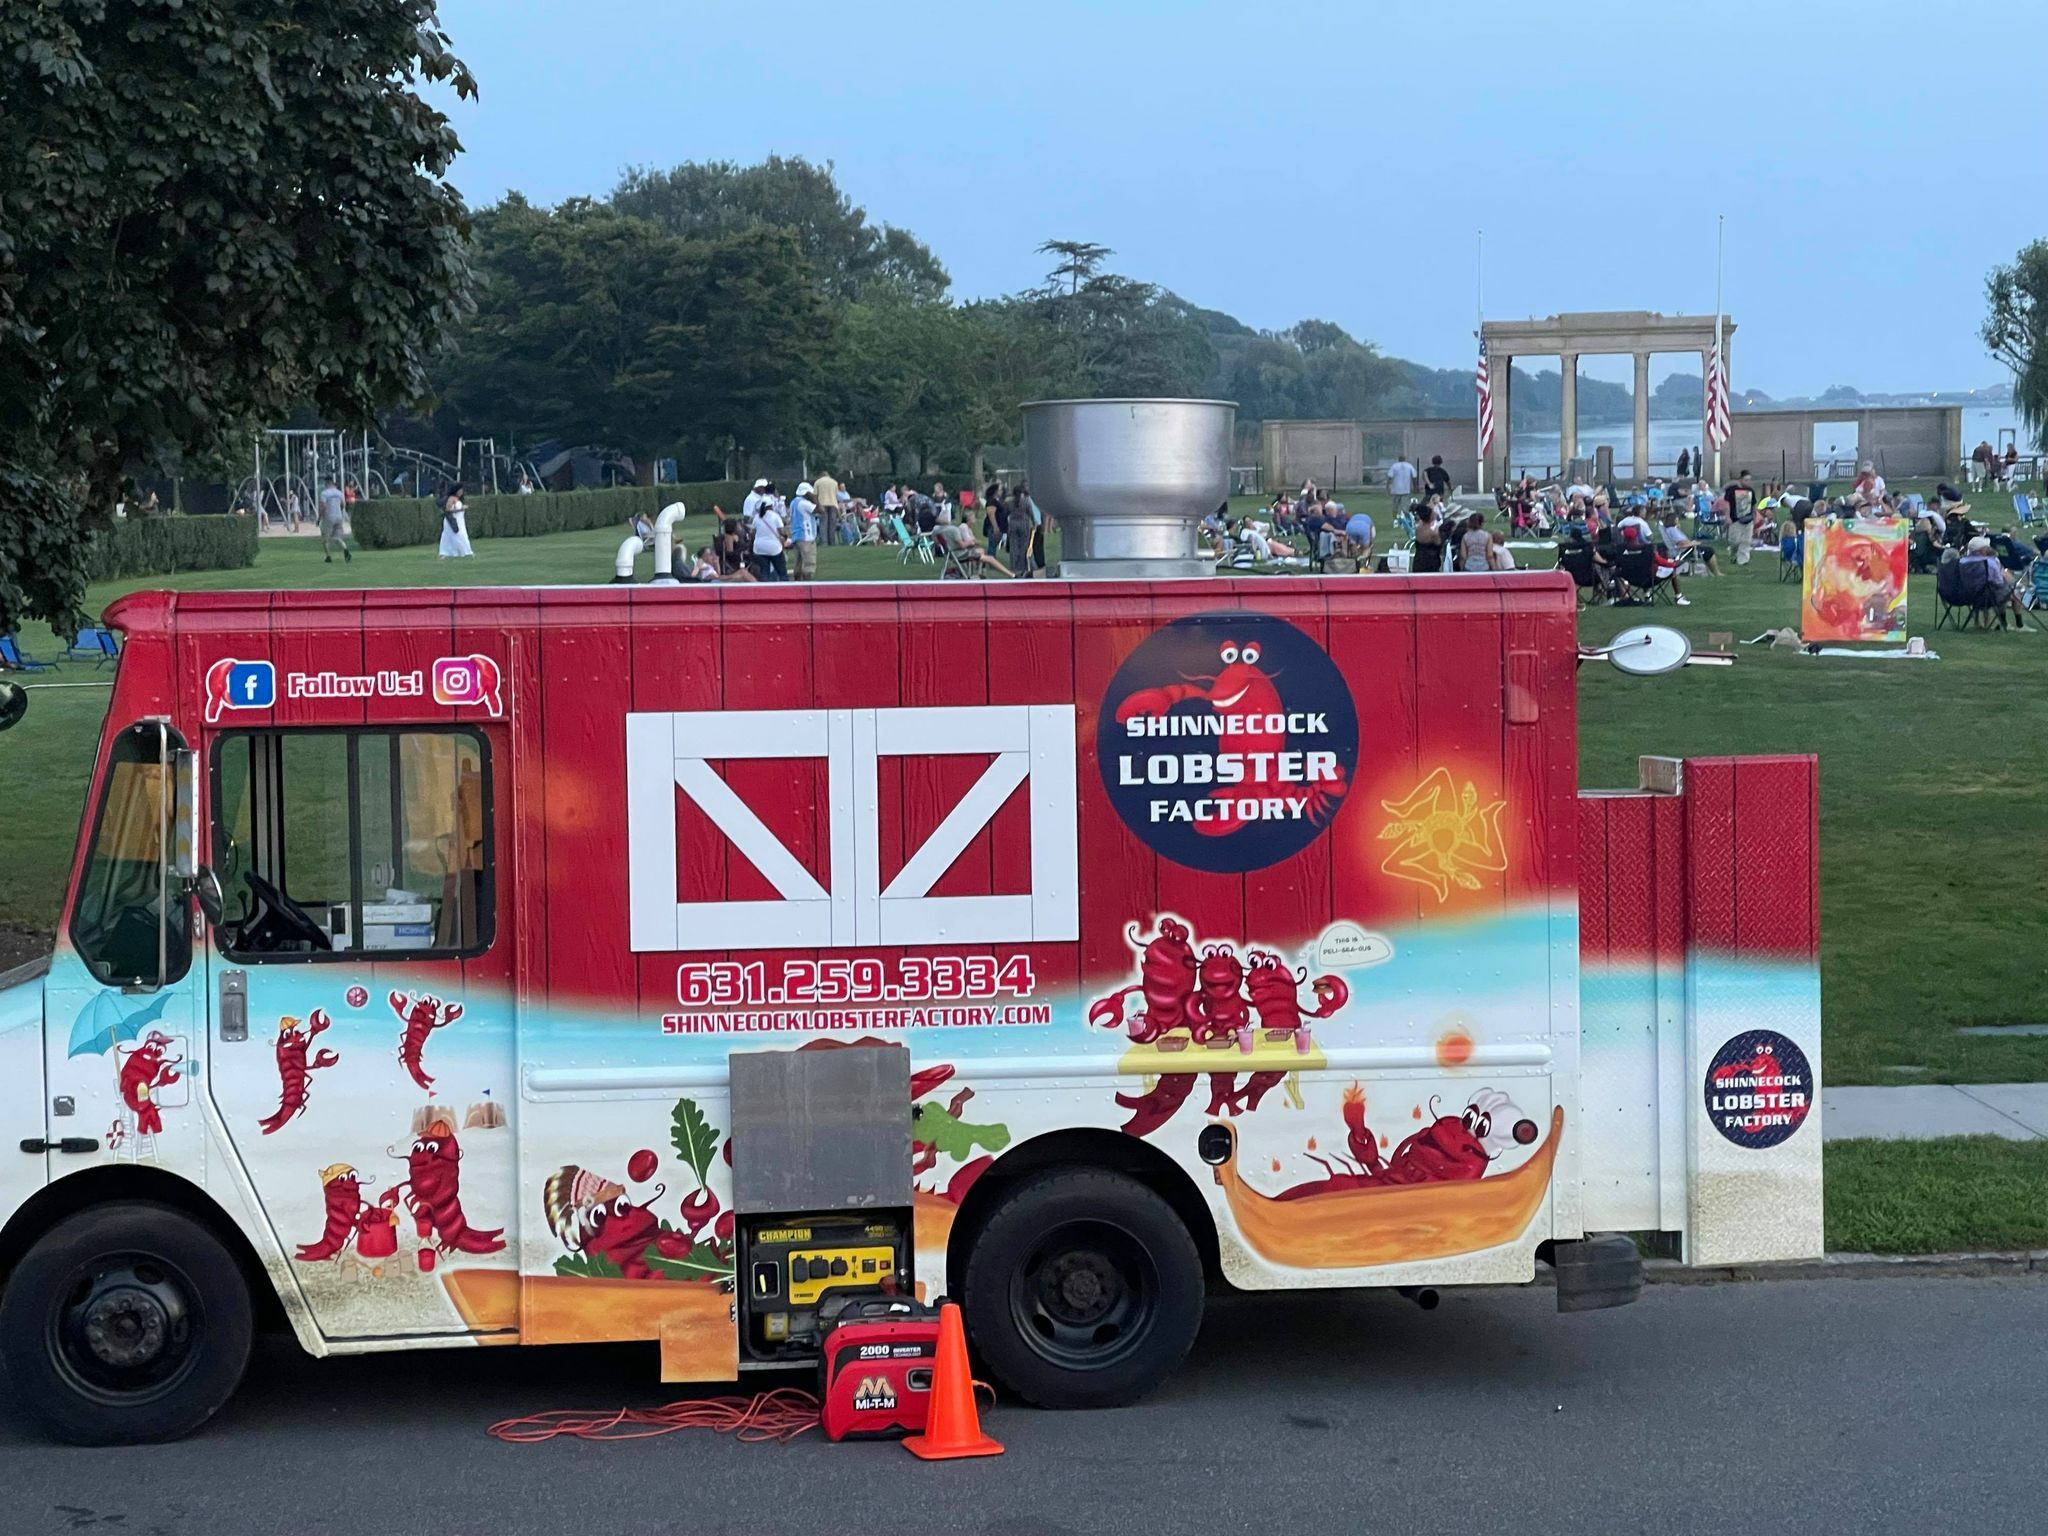 The Shinnecock Lobster Factory makes a splash this summer with its Lobster Roll Food Truck. COURTESY THE SHINNECOCK LOBSTER FACTORY